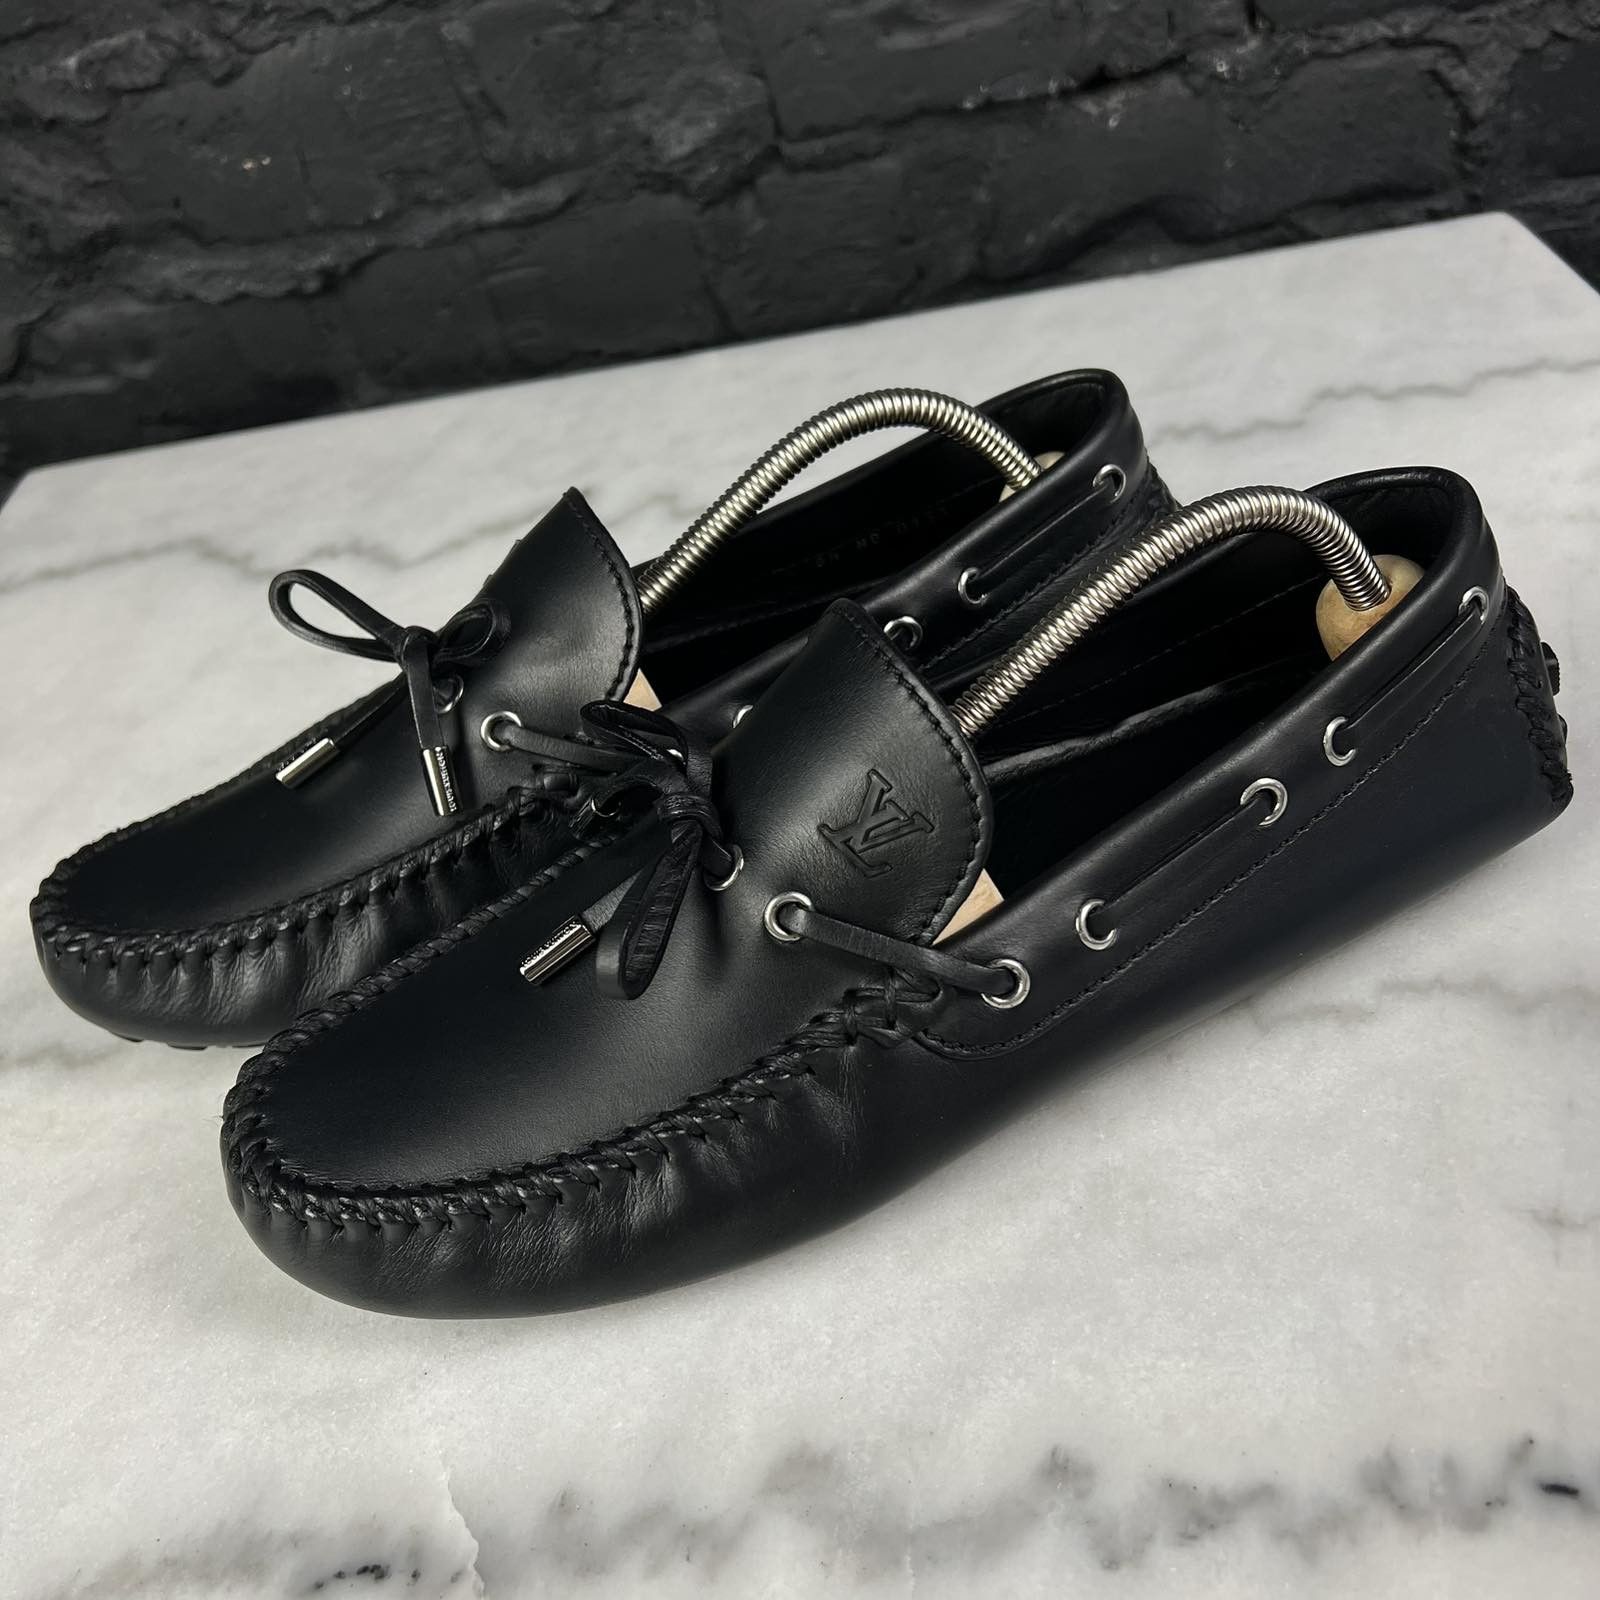 Louis Vuitton driving moccasin black leather 8.5 US